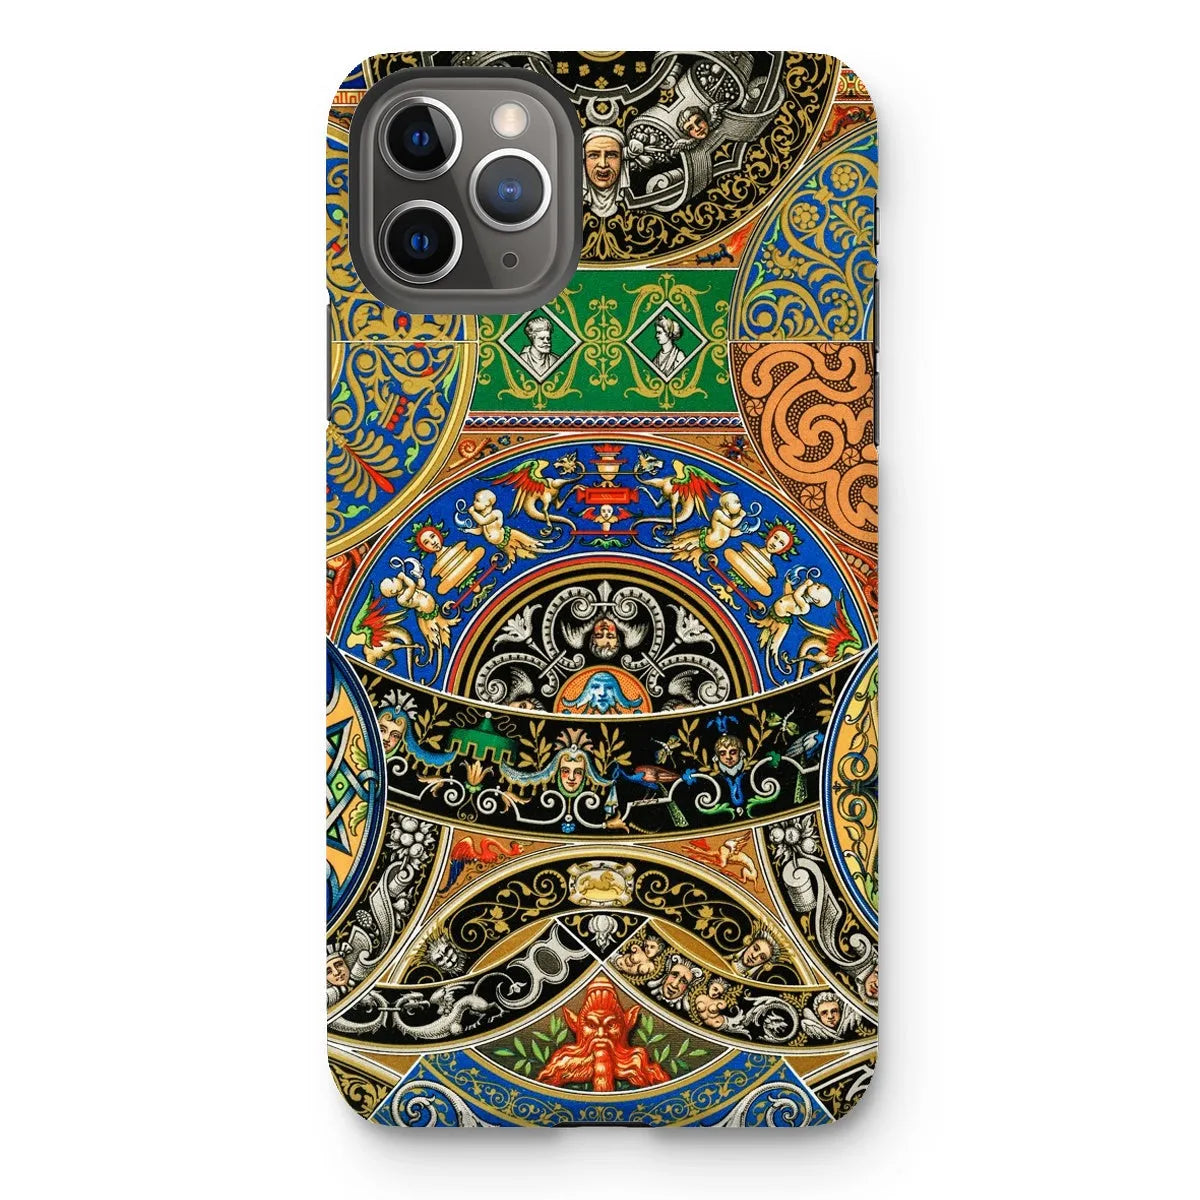 Renaissance Pattern 2 By Auguste Racinet Tough Phone Case - Iphone 11 Pro Max / Gloss - Mobile Phone Cases - Aesthetic